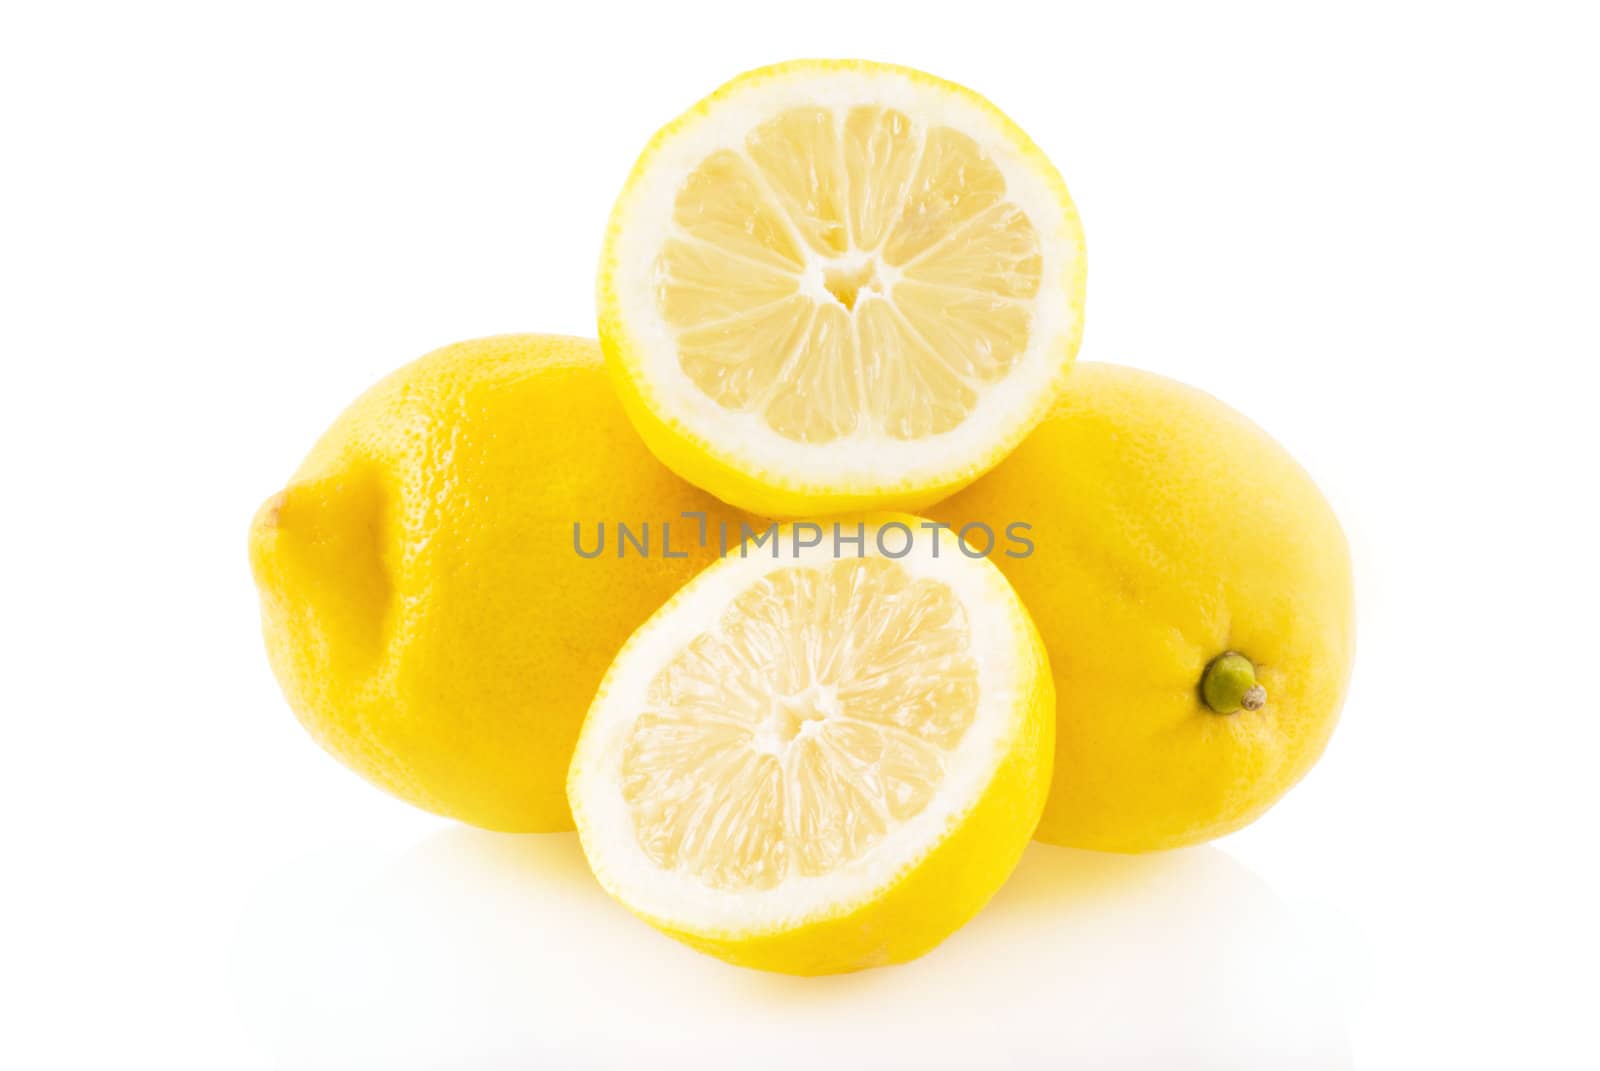 Lemon, two whole ones and one in half on a white background.